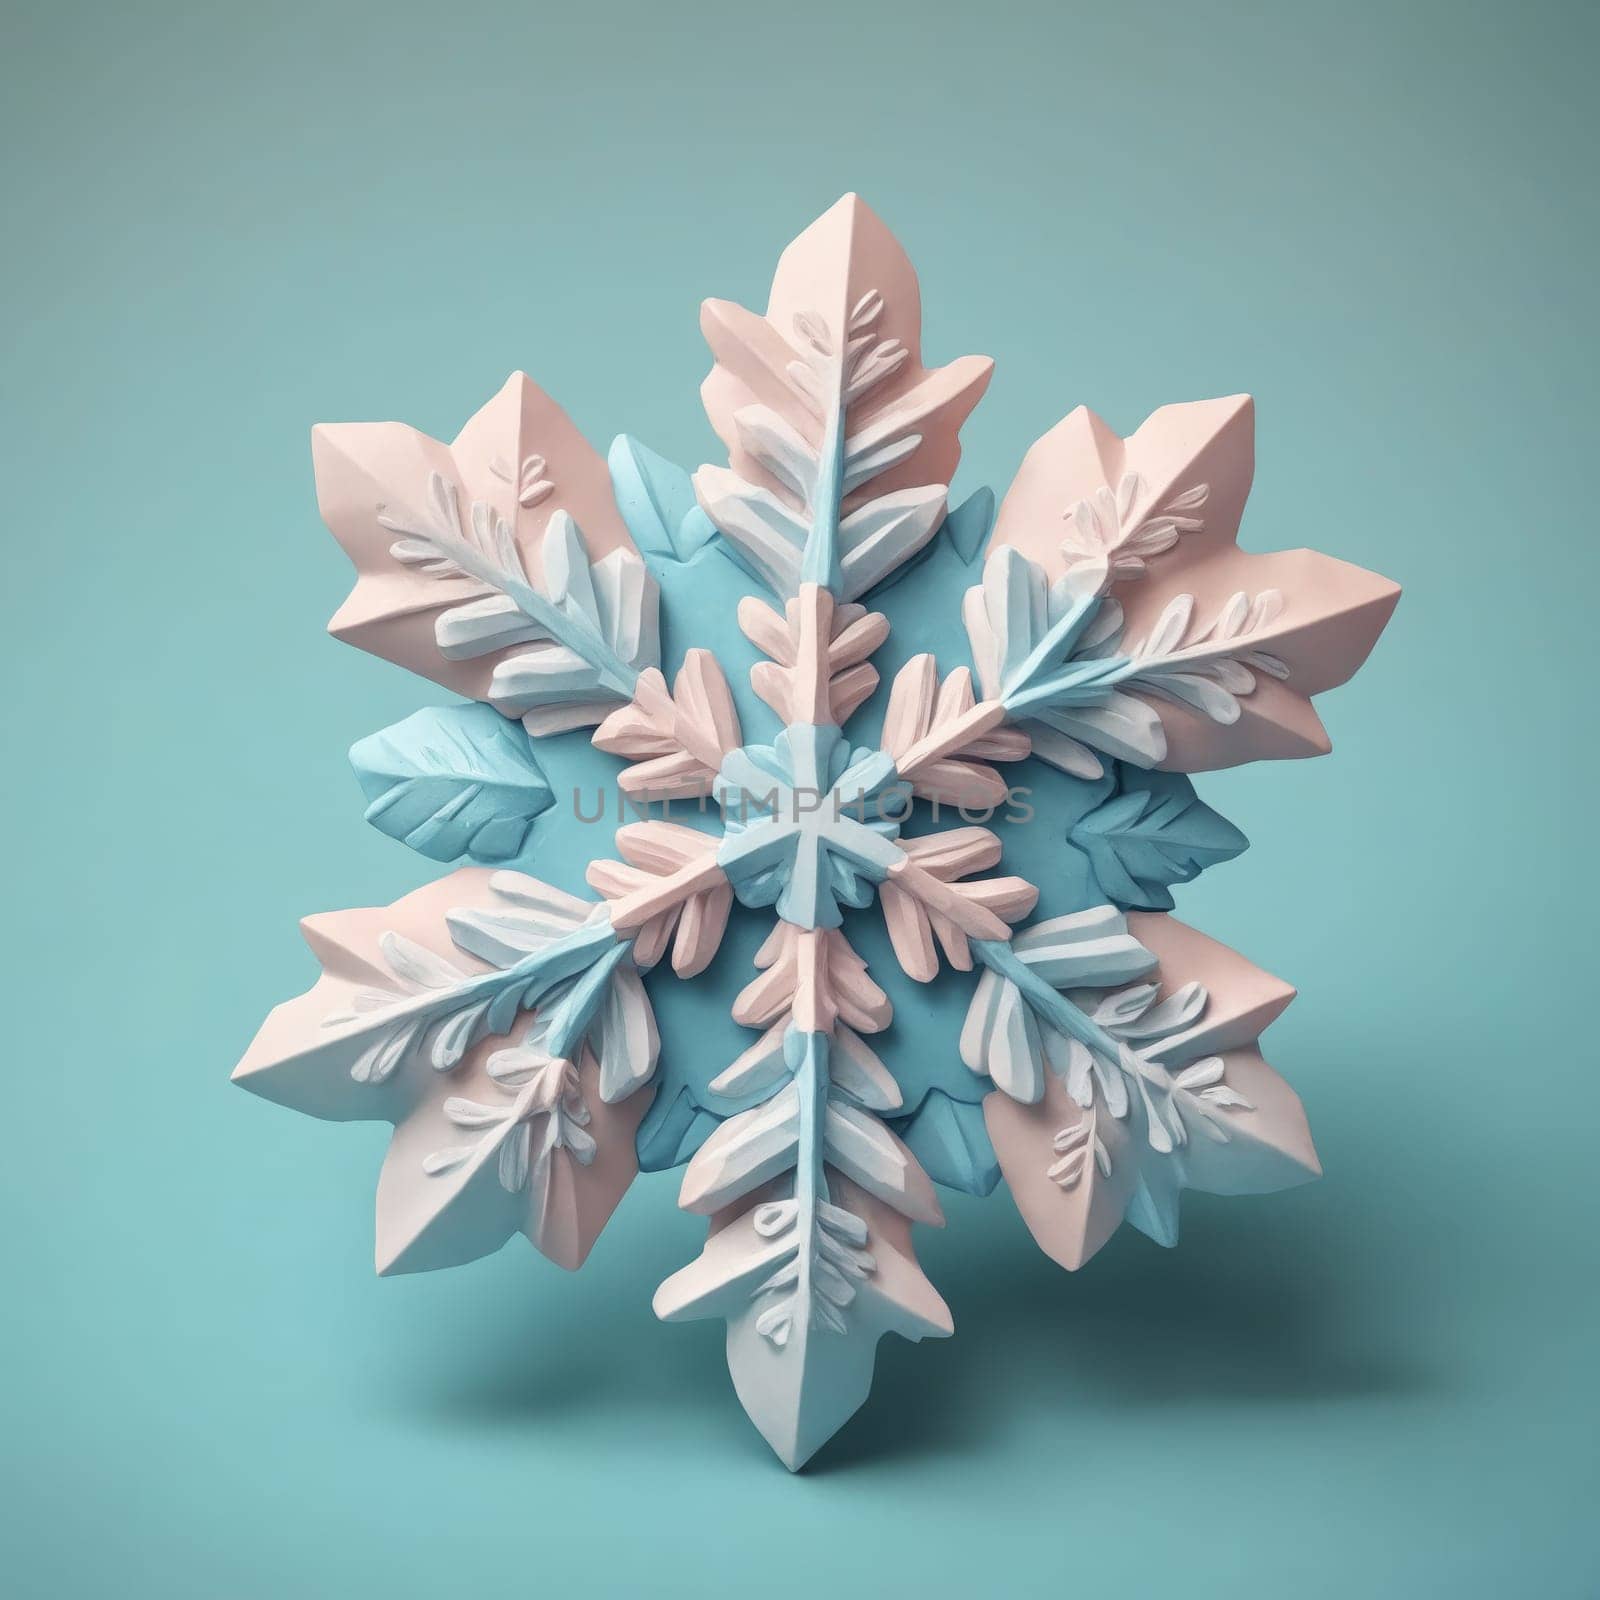 3D rendering of a snowflake on an electric blue background by Andre1ns